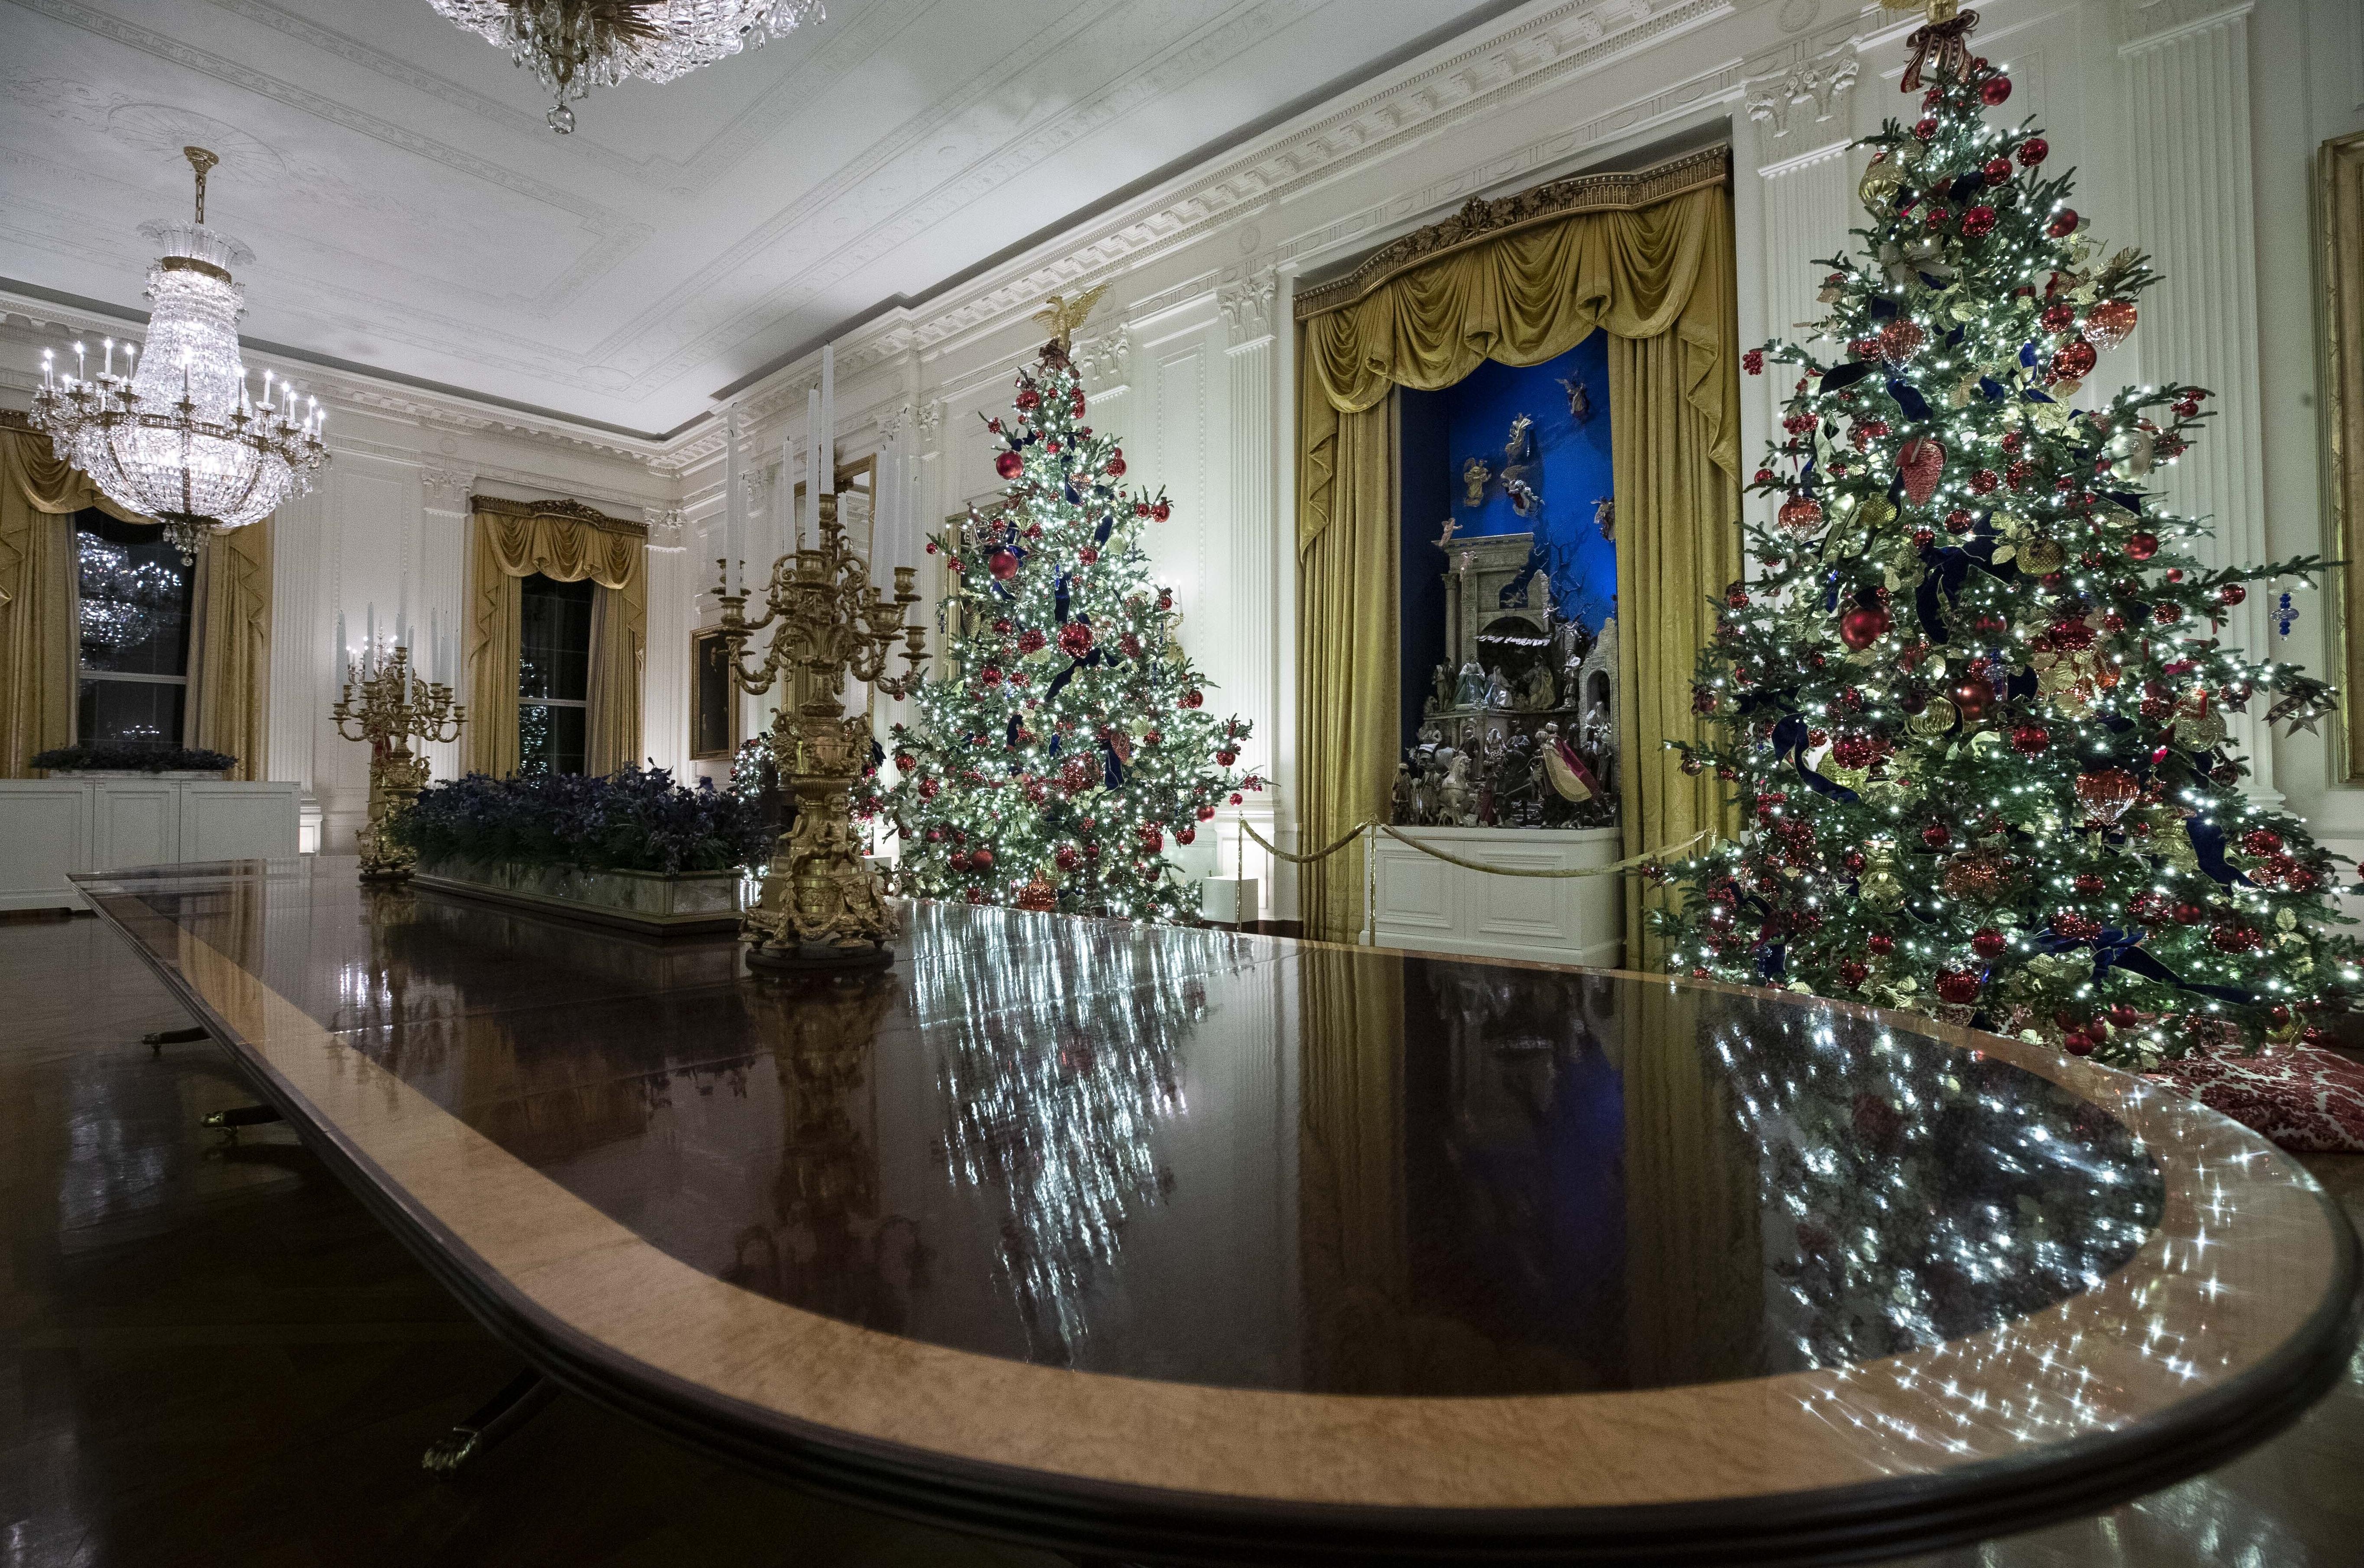 Patriotism Is The Theme Of Christmas At The White House